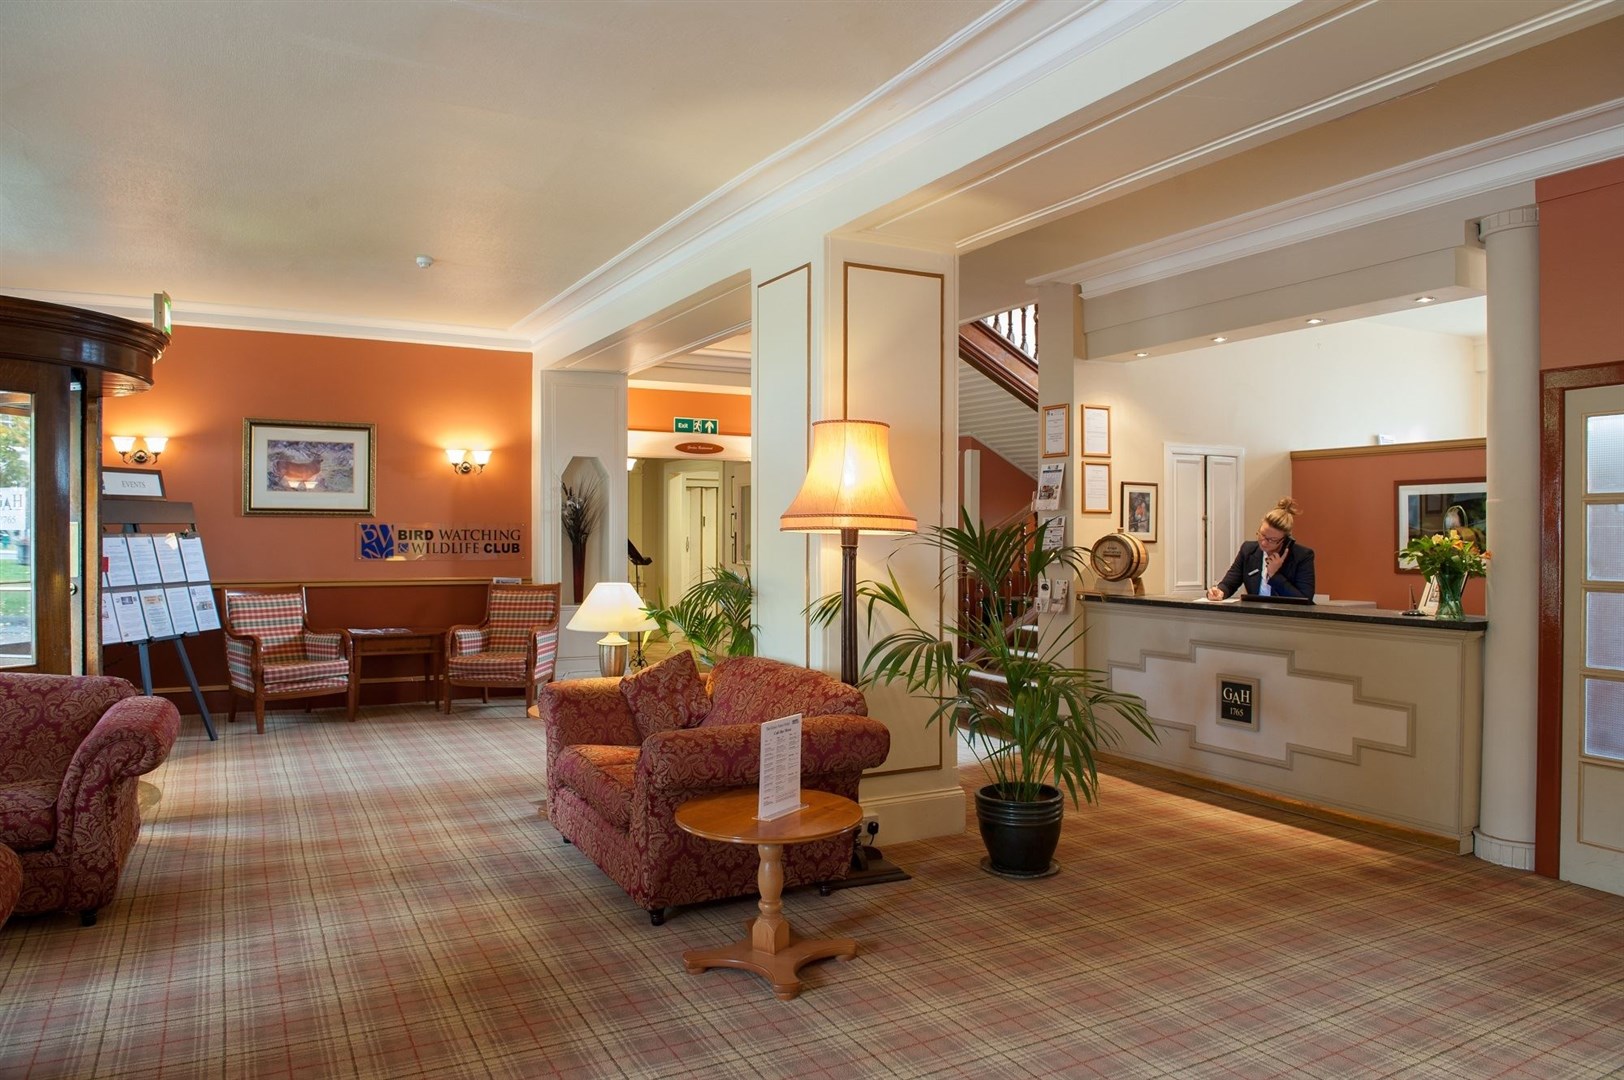 The reception area of the hotel which has just been sold.